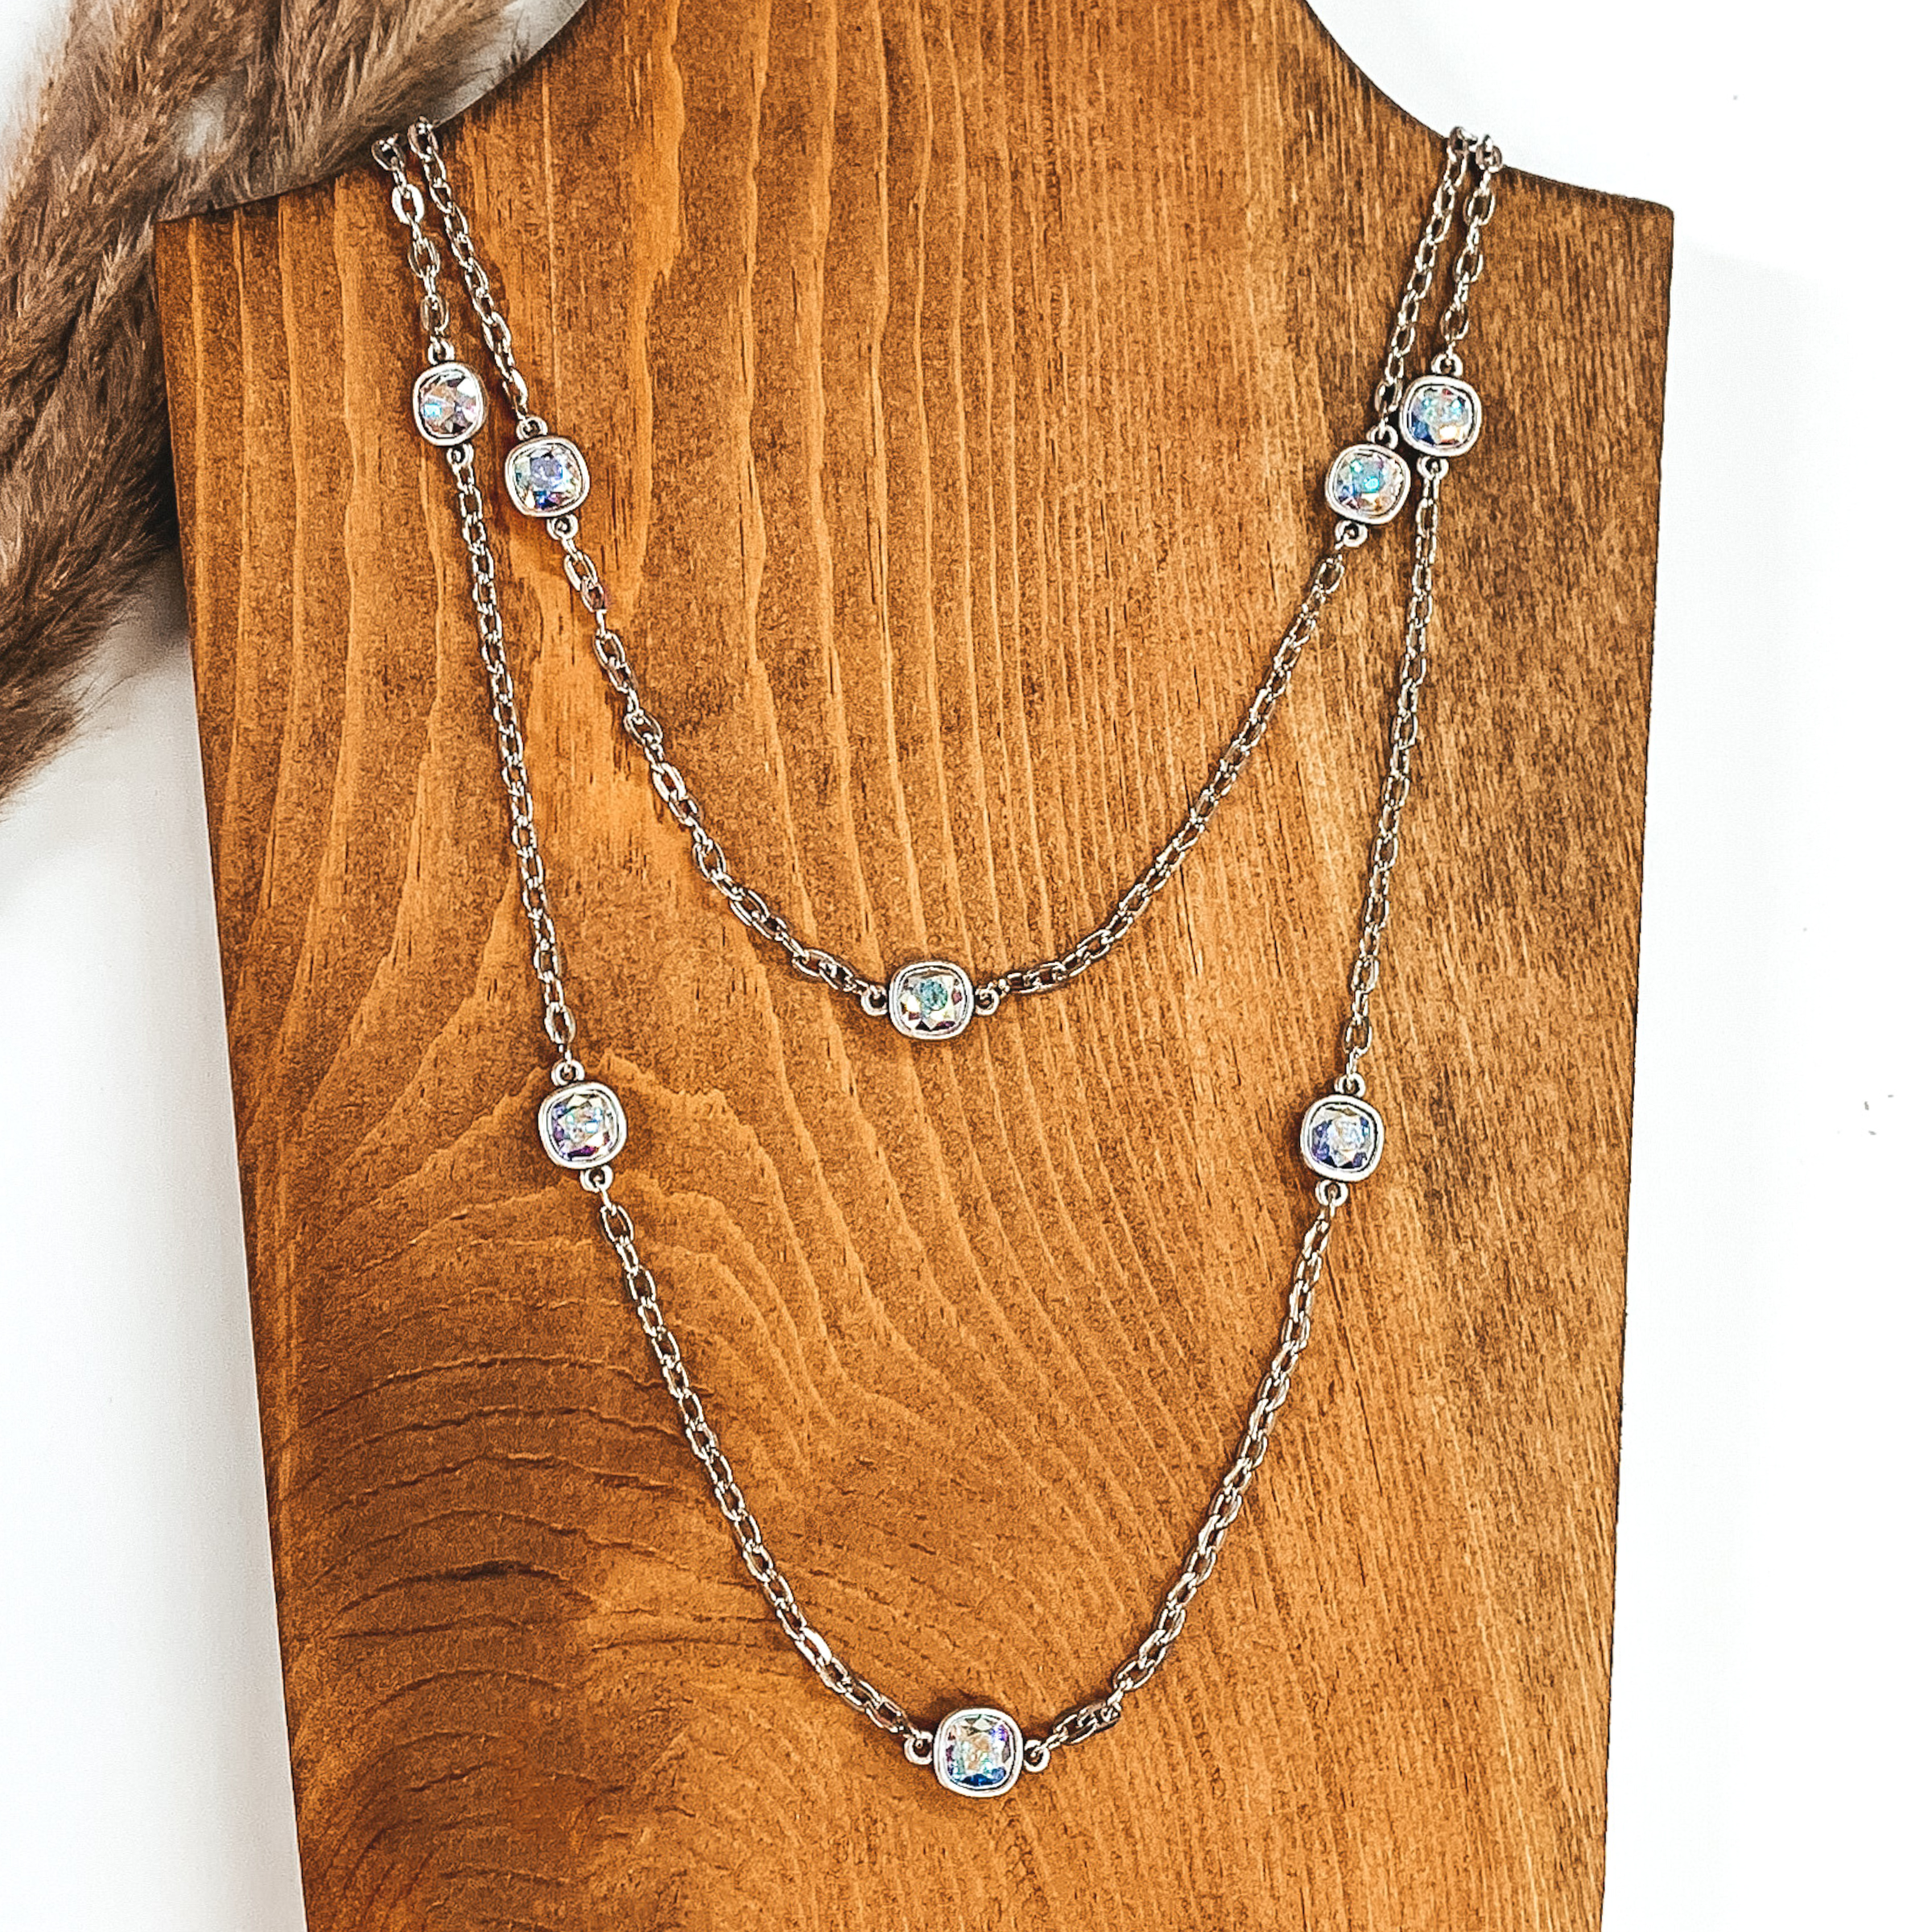 Silver chained necklace with AB square crystal spacers pictured on a white and wood background